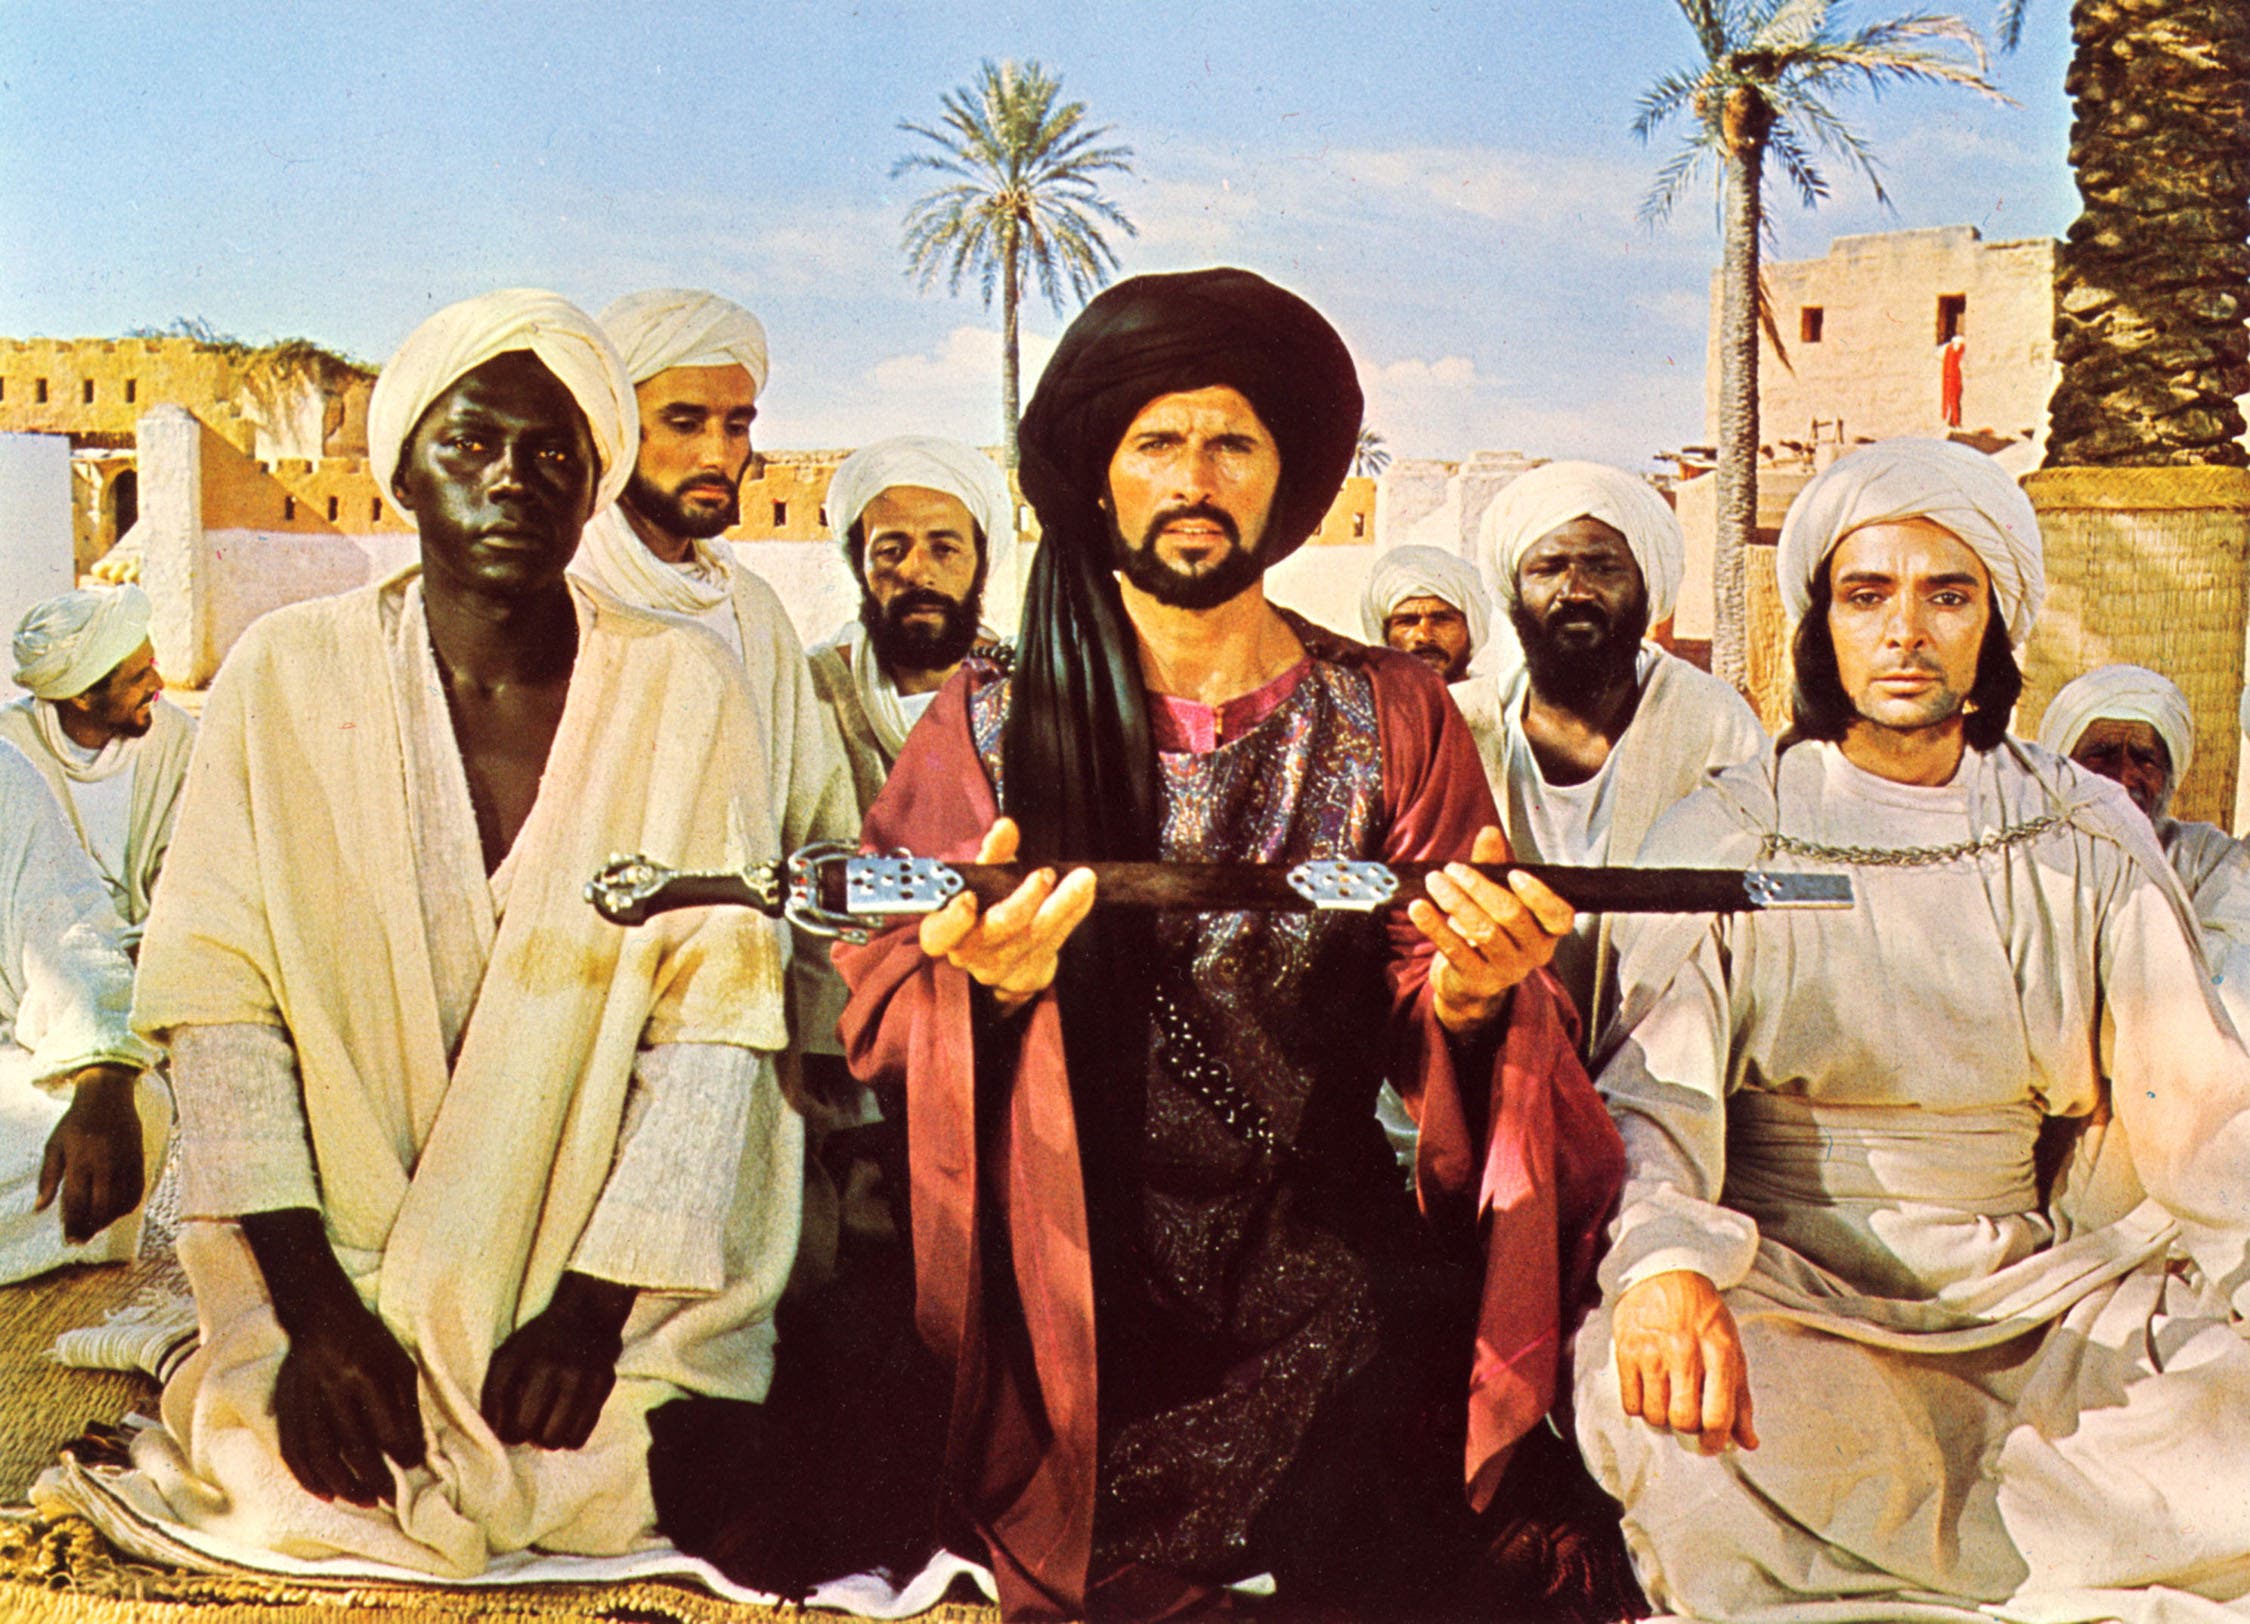 It was this film that traced the early days of Islam that shook the world, and continues to resonate today. (Supplied)